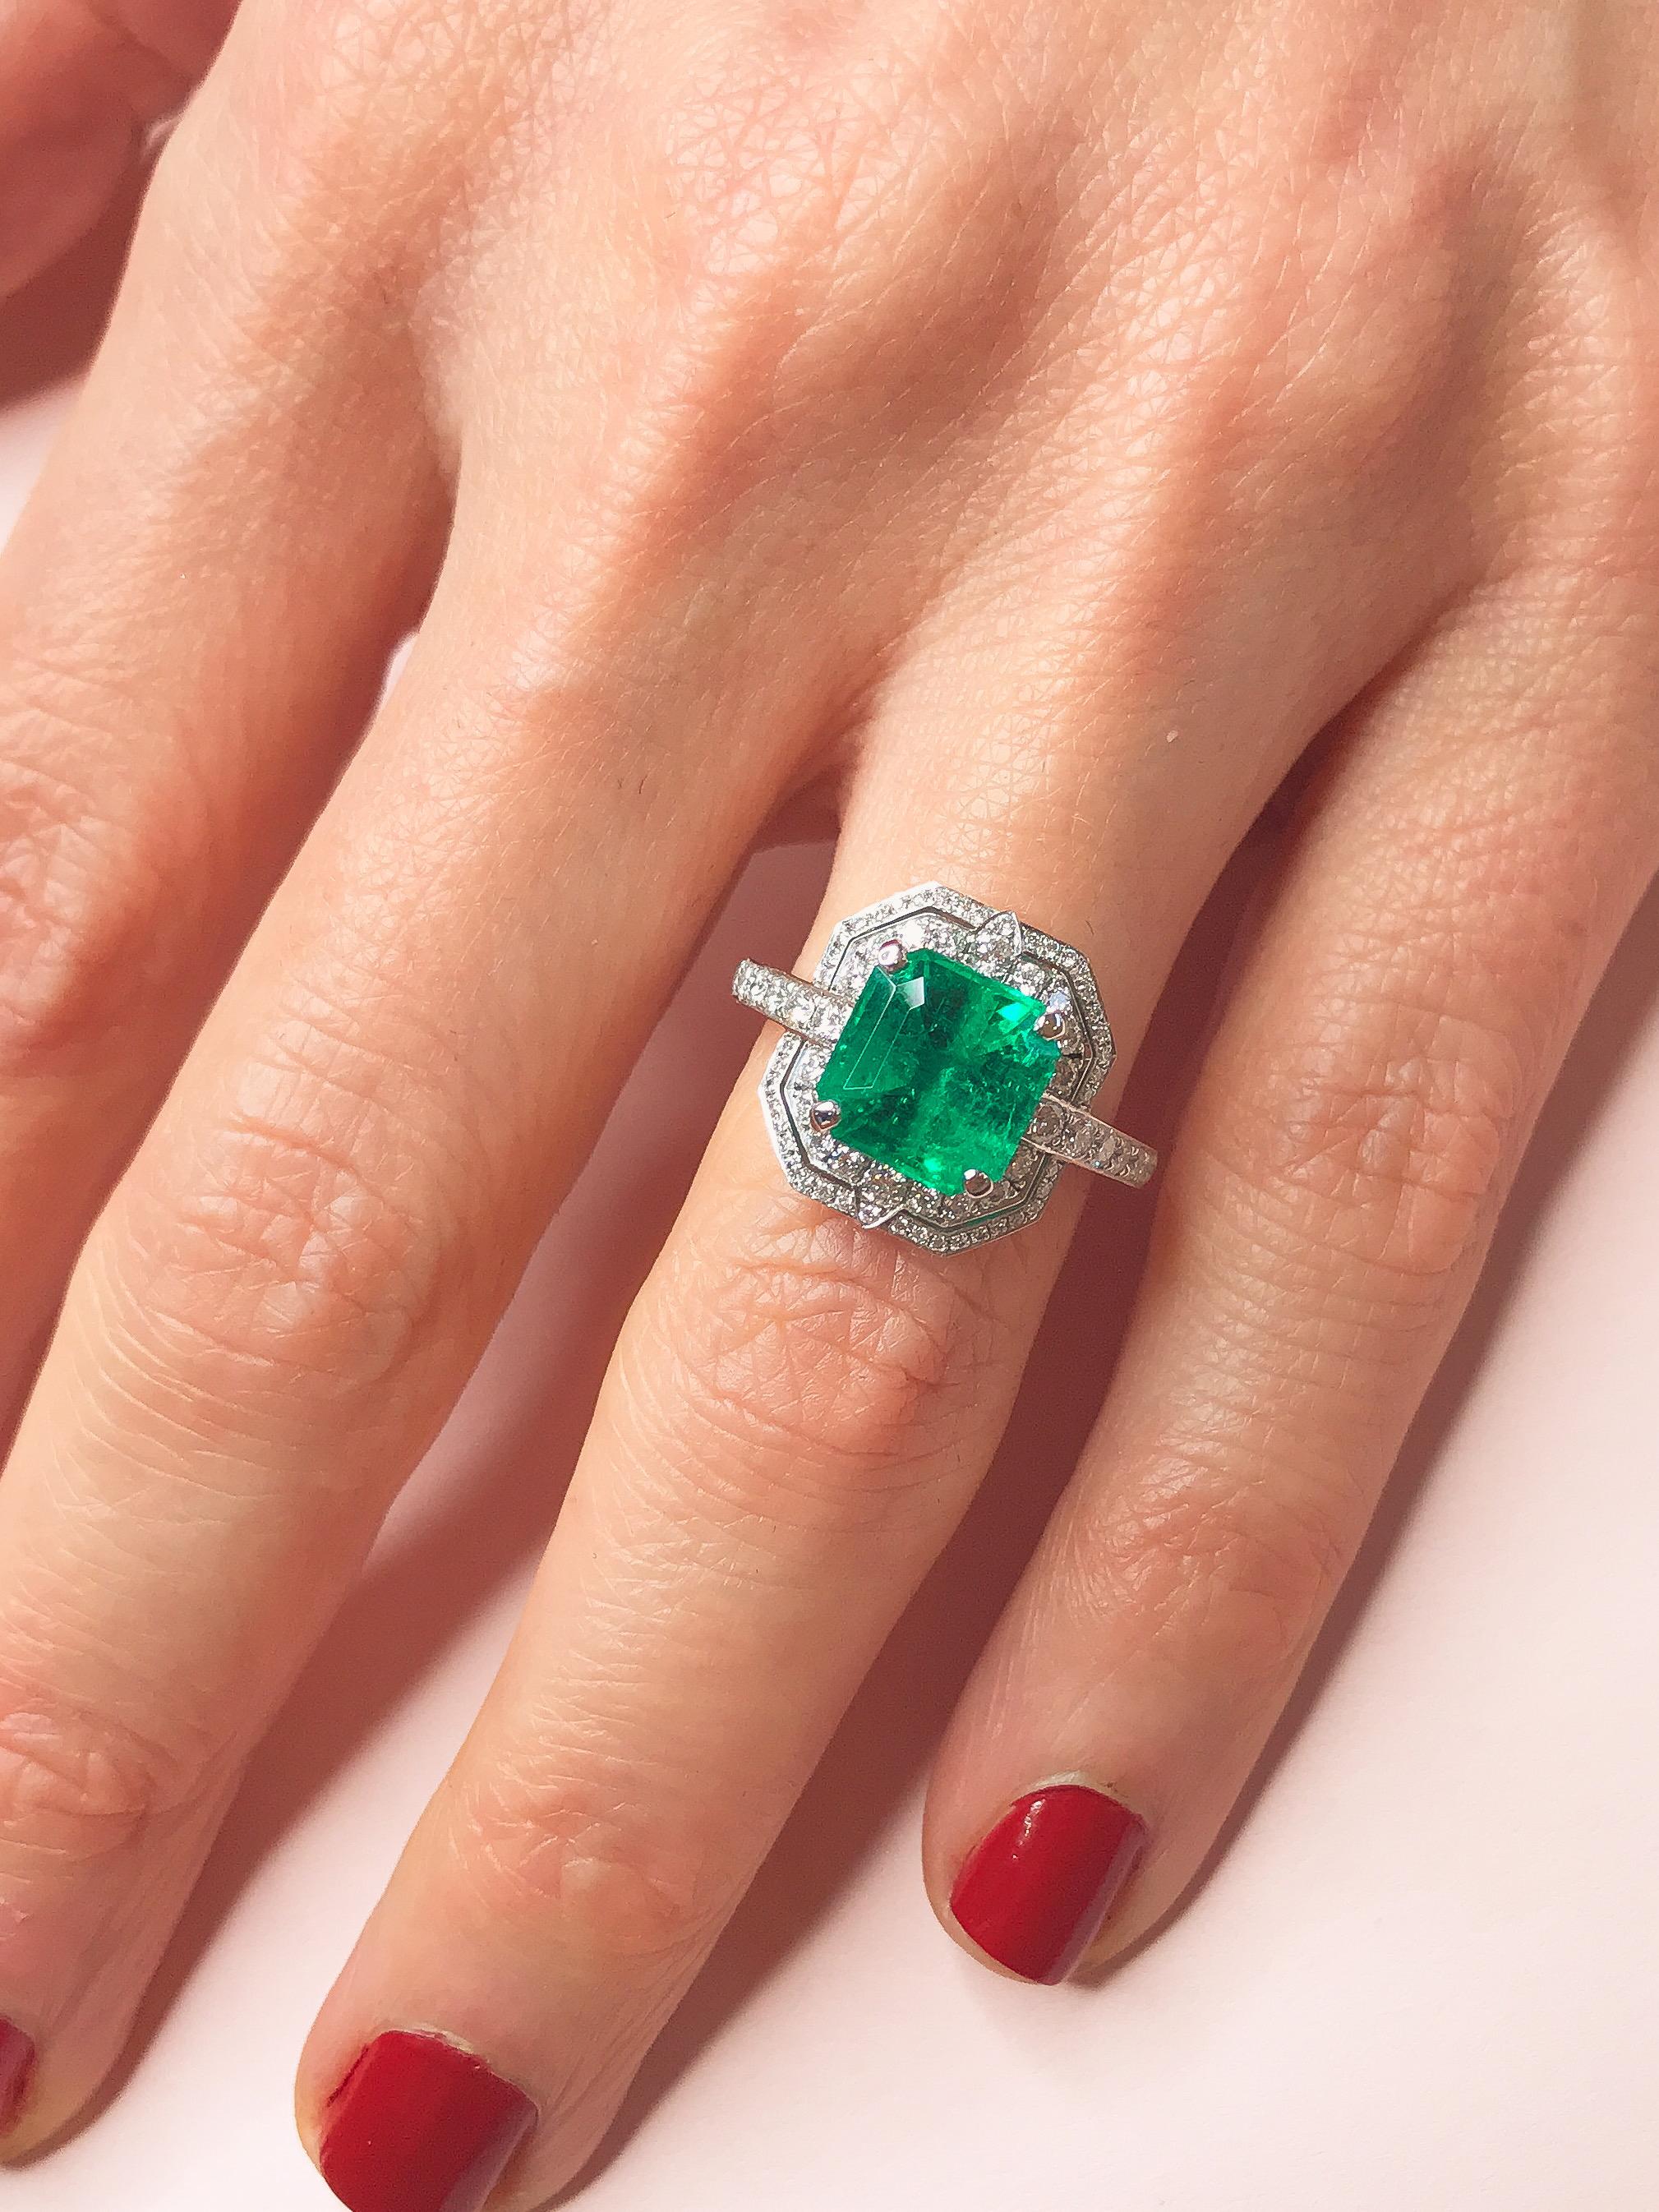 The resplendent green emerald at the heart of this Art Deco-inspired ring is an impressive stone, specially selected from the Haruni vault. Its deep, rich colour is offset by the gleaming white of the small diamonds in the ring’s double halo